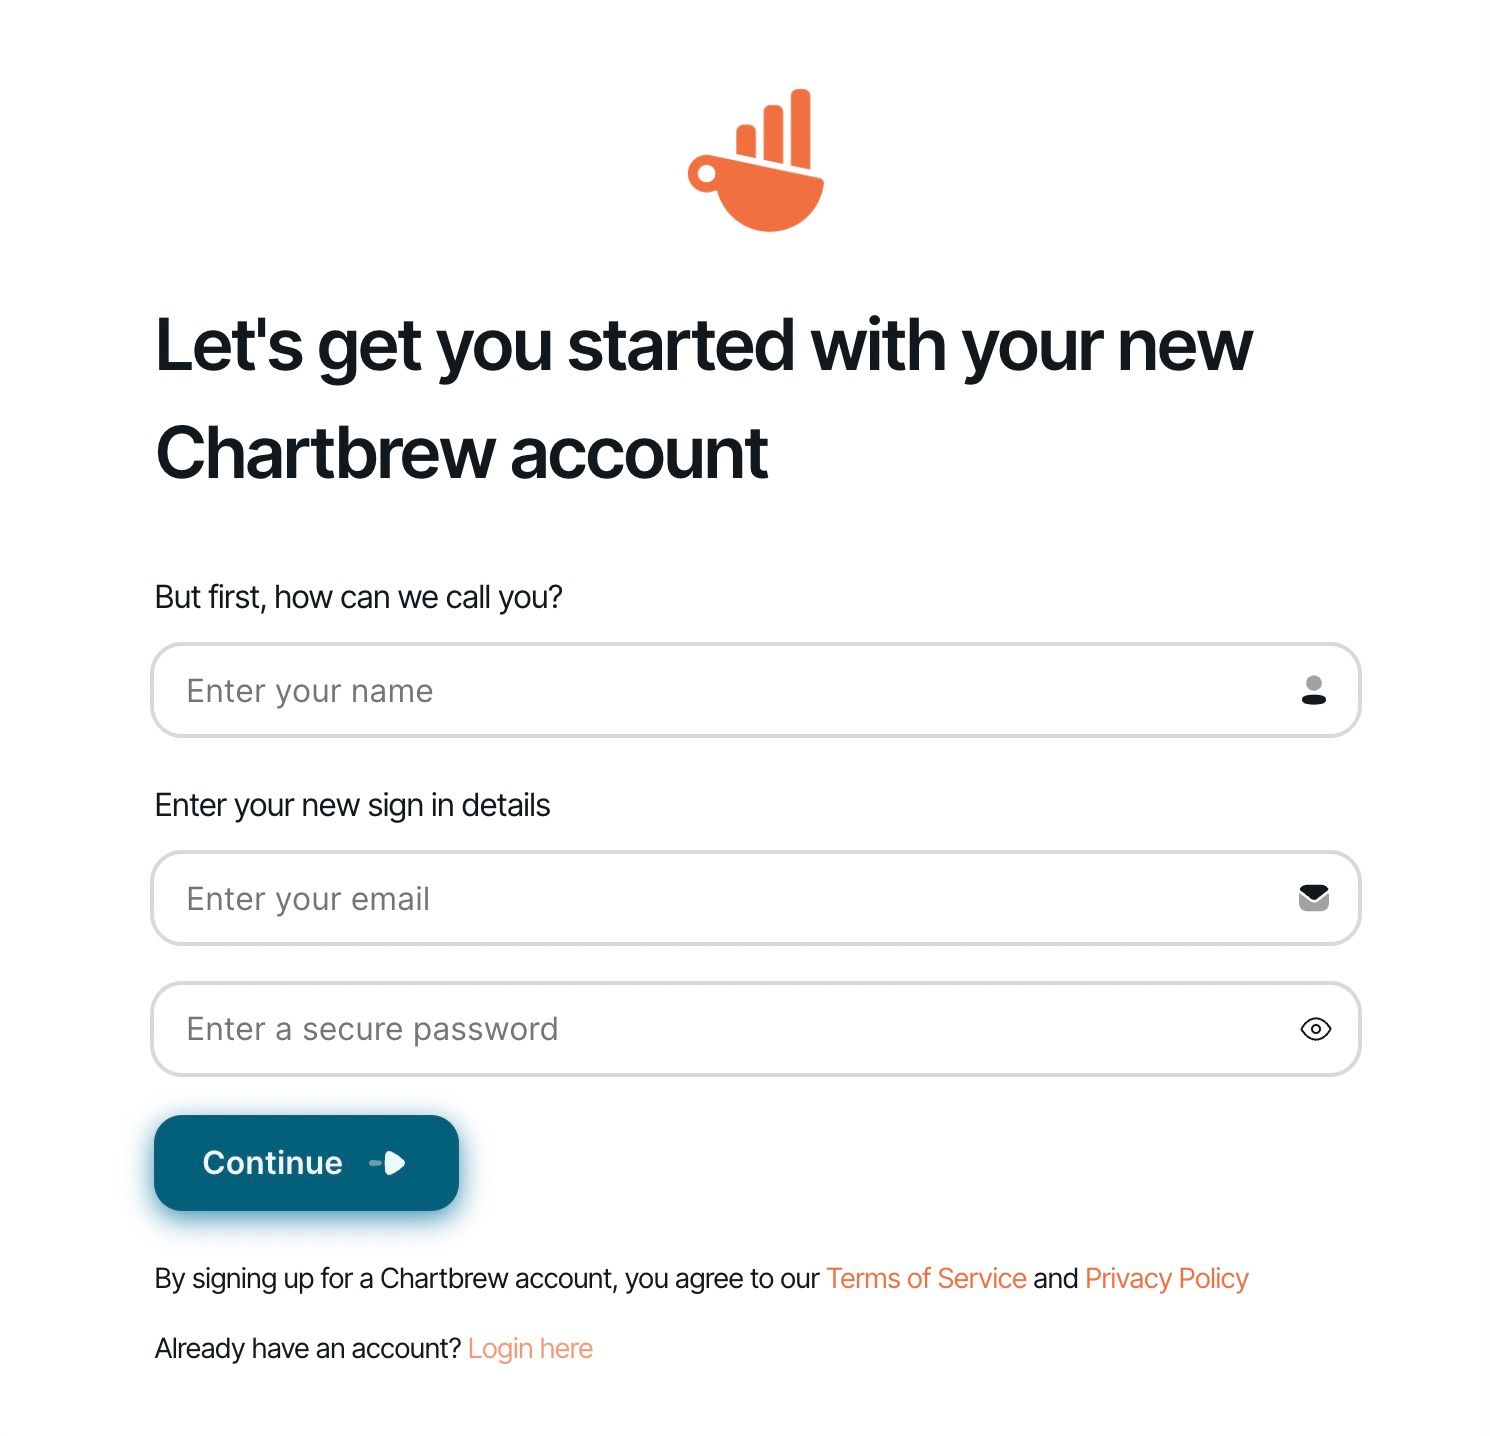 The Chartbrew signup page